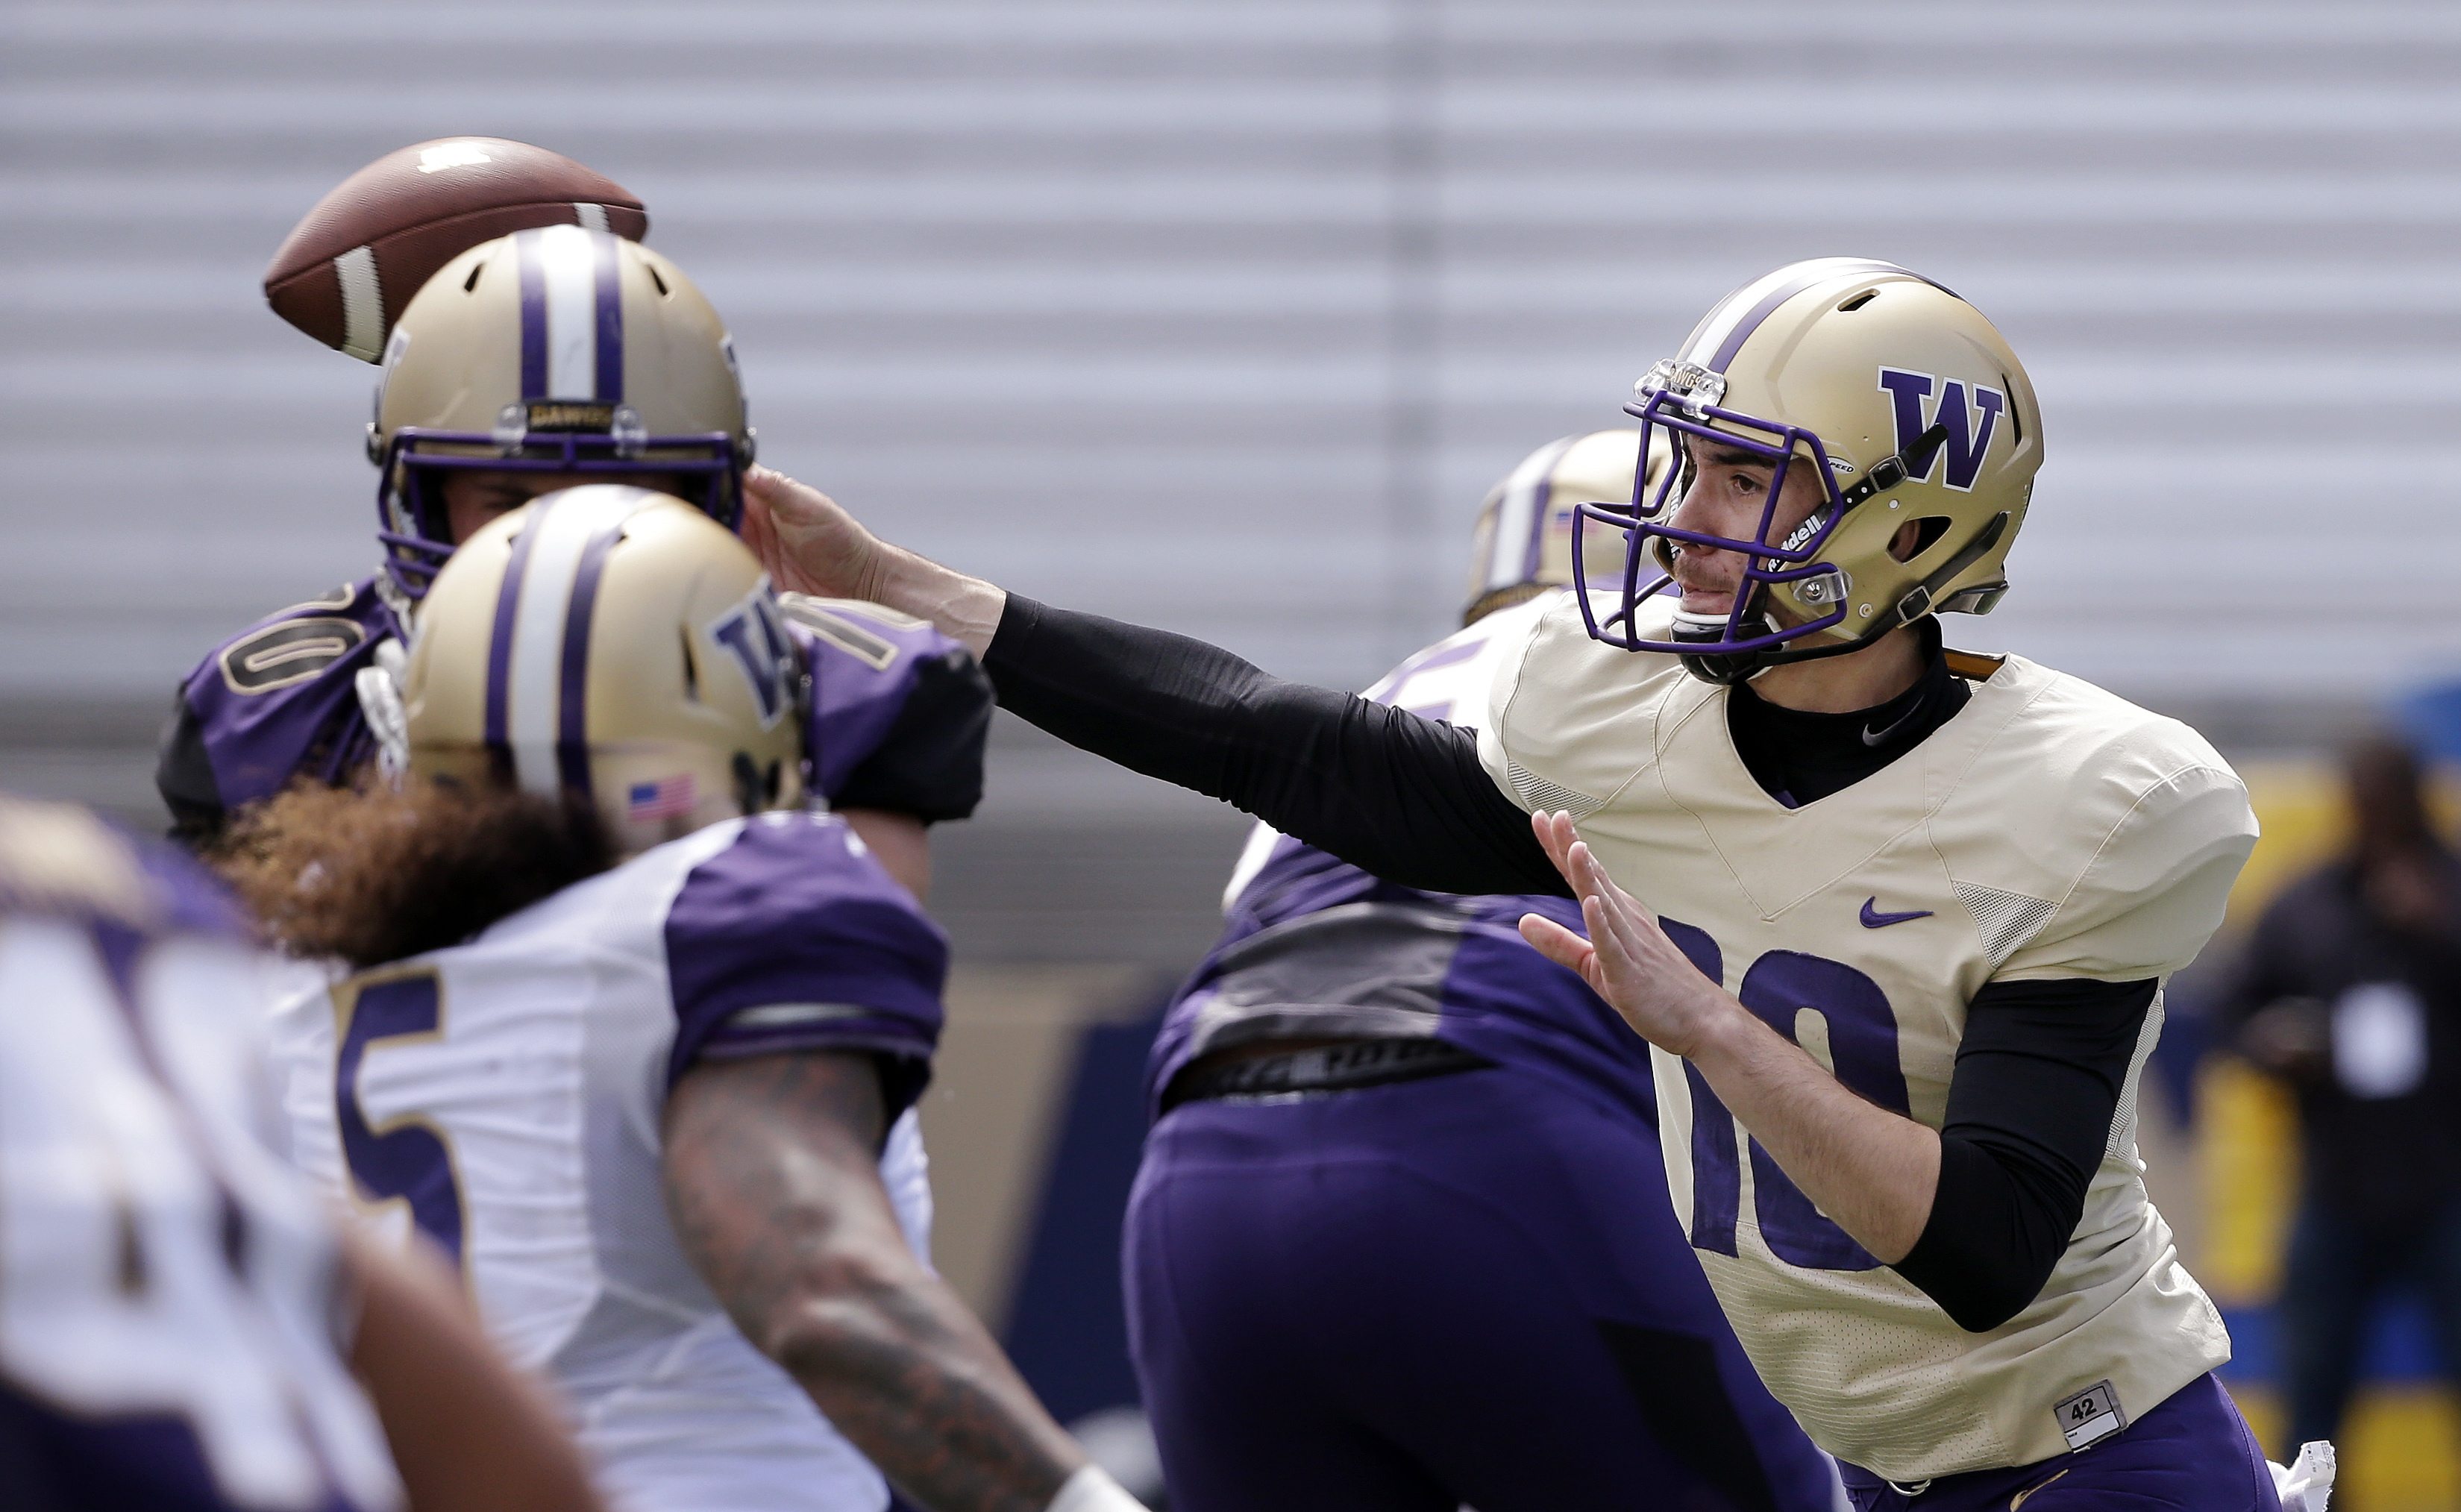 Washington quarterback Tony Rodriguez throws at the team's annual spring preview college football event Saturday, April 23, 2016, in Seattle.